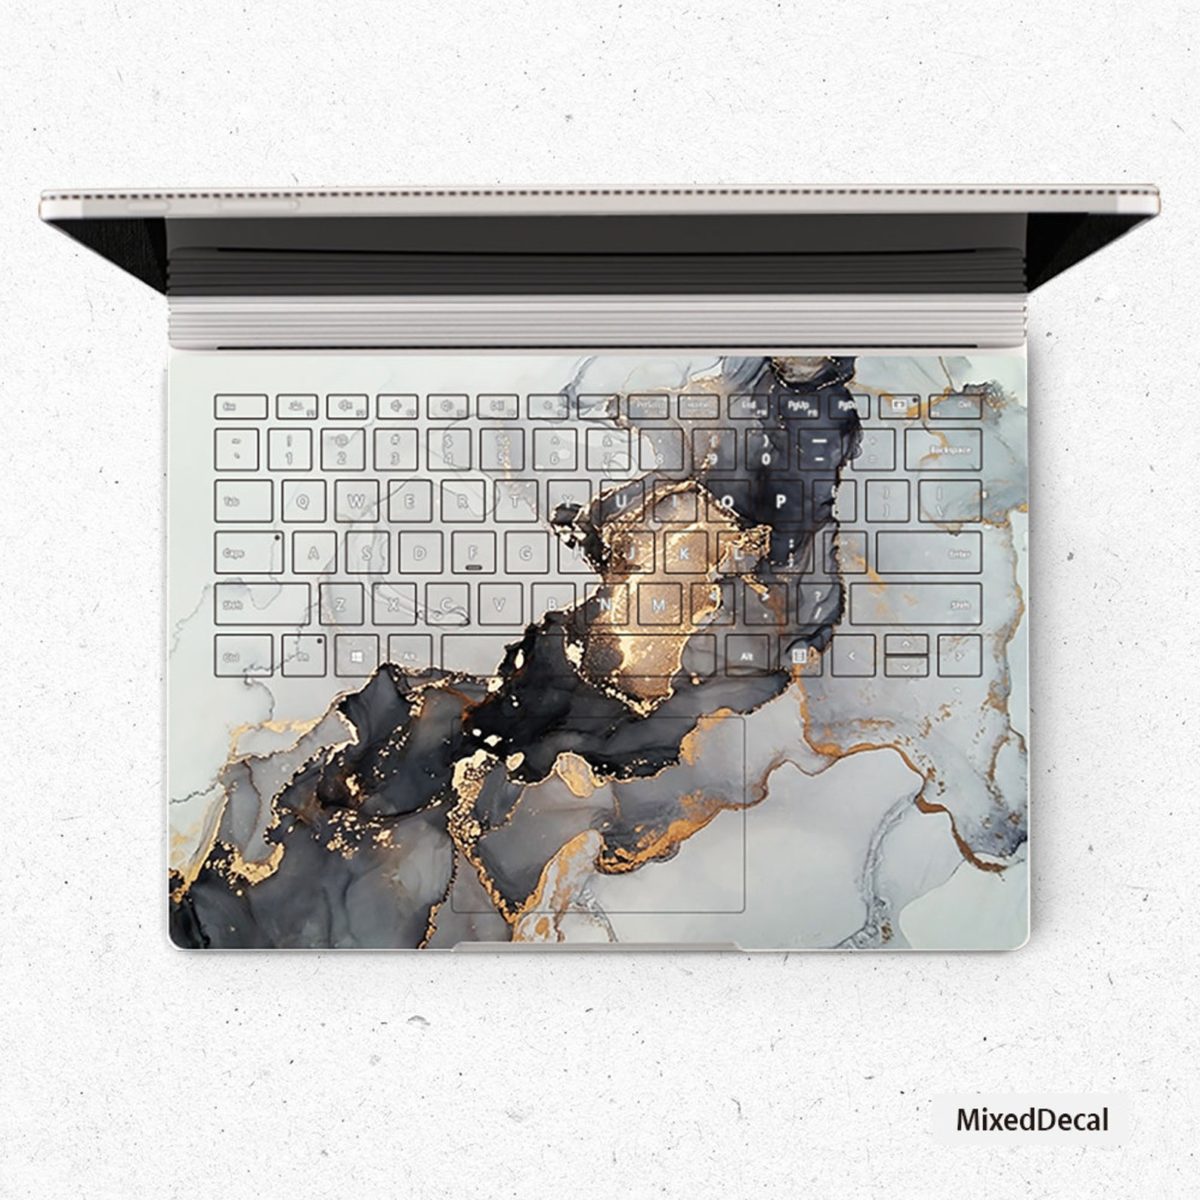 23 Awesome Laptop Decals From Etsy to Make Working a Bit More Fun | Get creative with your workspace, specifically your laptop!